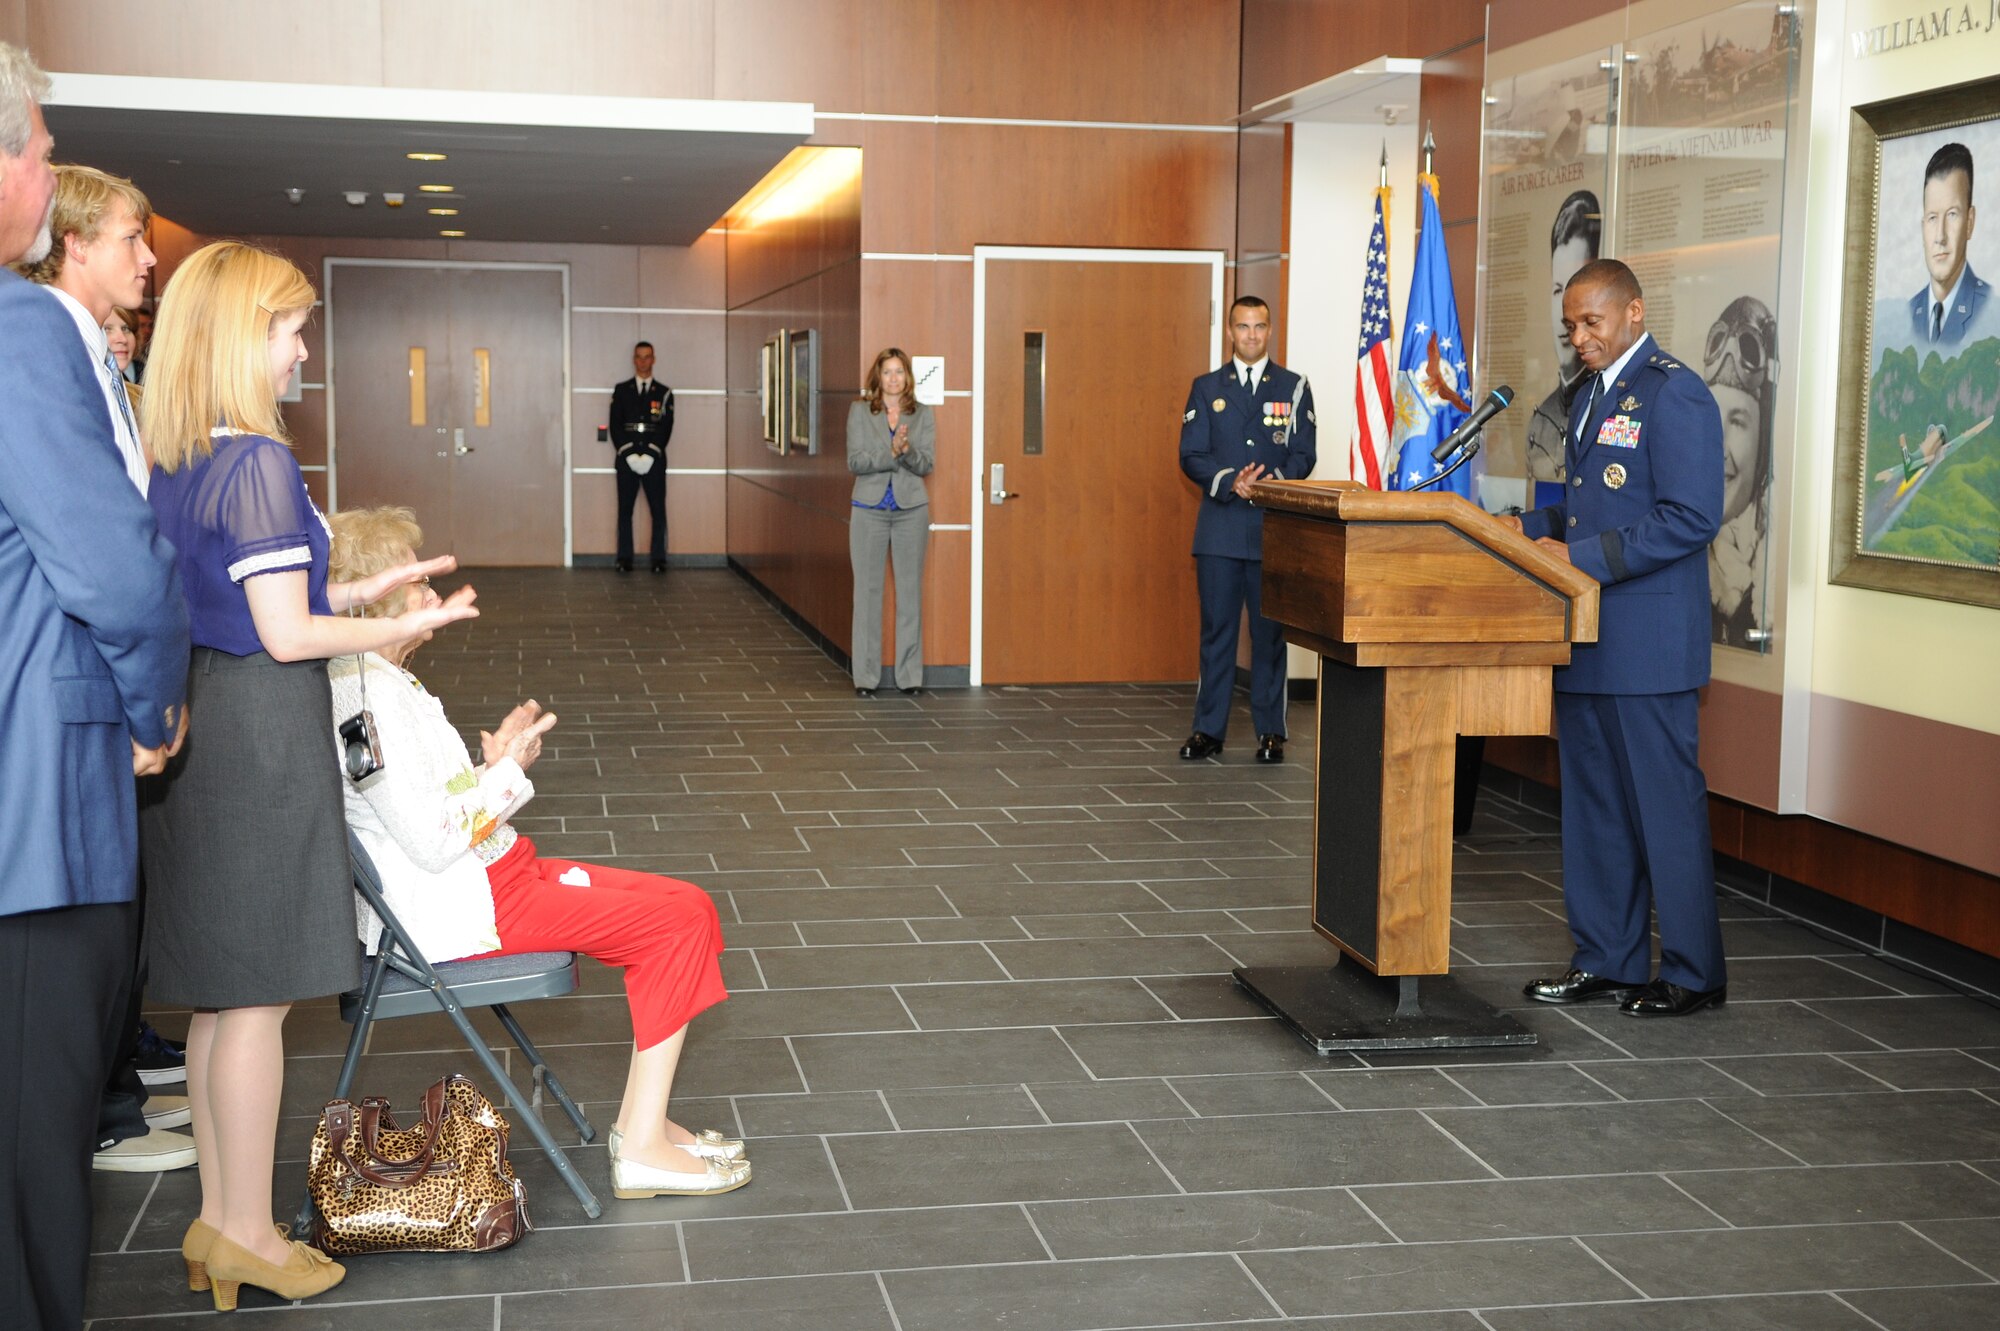 Maj. Gen. Darren McDew, Air Force District of Washington commander, speaks in front event attendees, Col. William A. Jones III's widow, Mrs. Lois Jones and other Jones family members at a display dedication in the new William A. Jones III Building on July 28. Jones died in an aircraft accident Nov. 15, 1969 before the Medal of Honor could be presented to him for his selfless heroism. He was 47. His widow received the decoration from President Richard M. Nixon at the White House Aug. 6, 1970. (U.S. Air Force photo/Staff Sgt. Kris Levasseur)